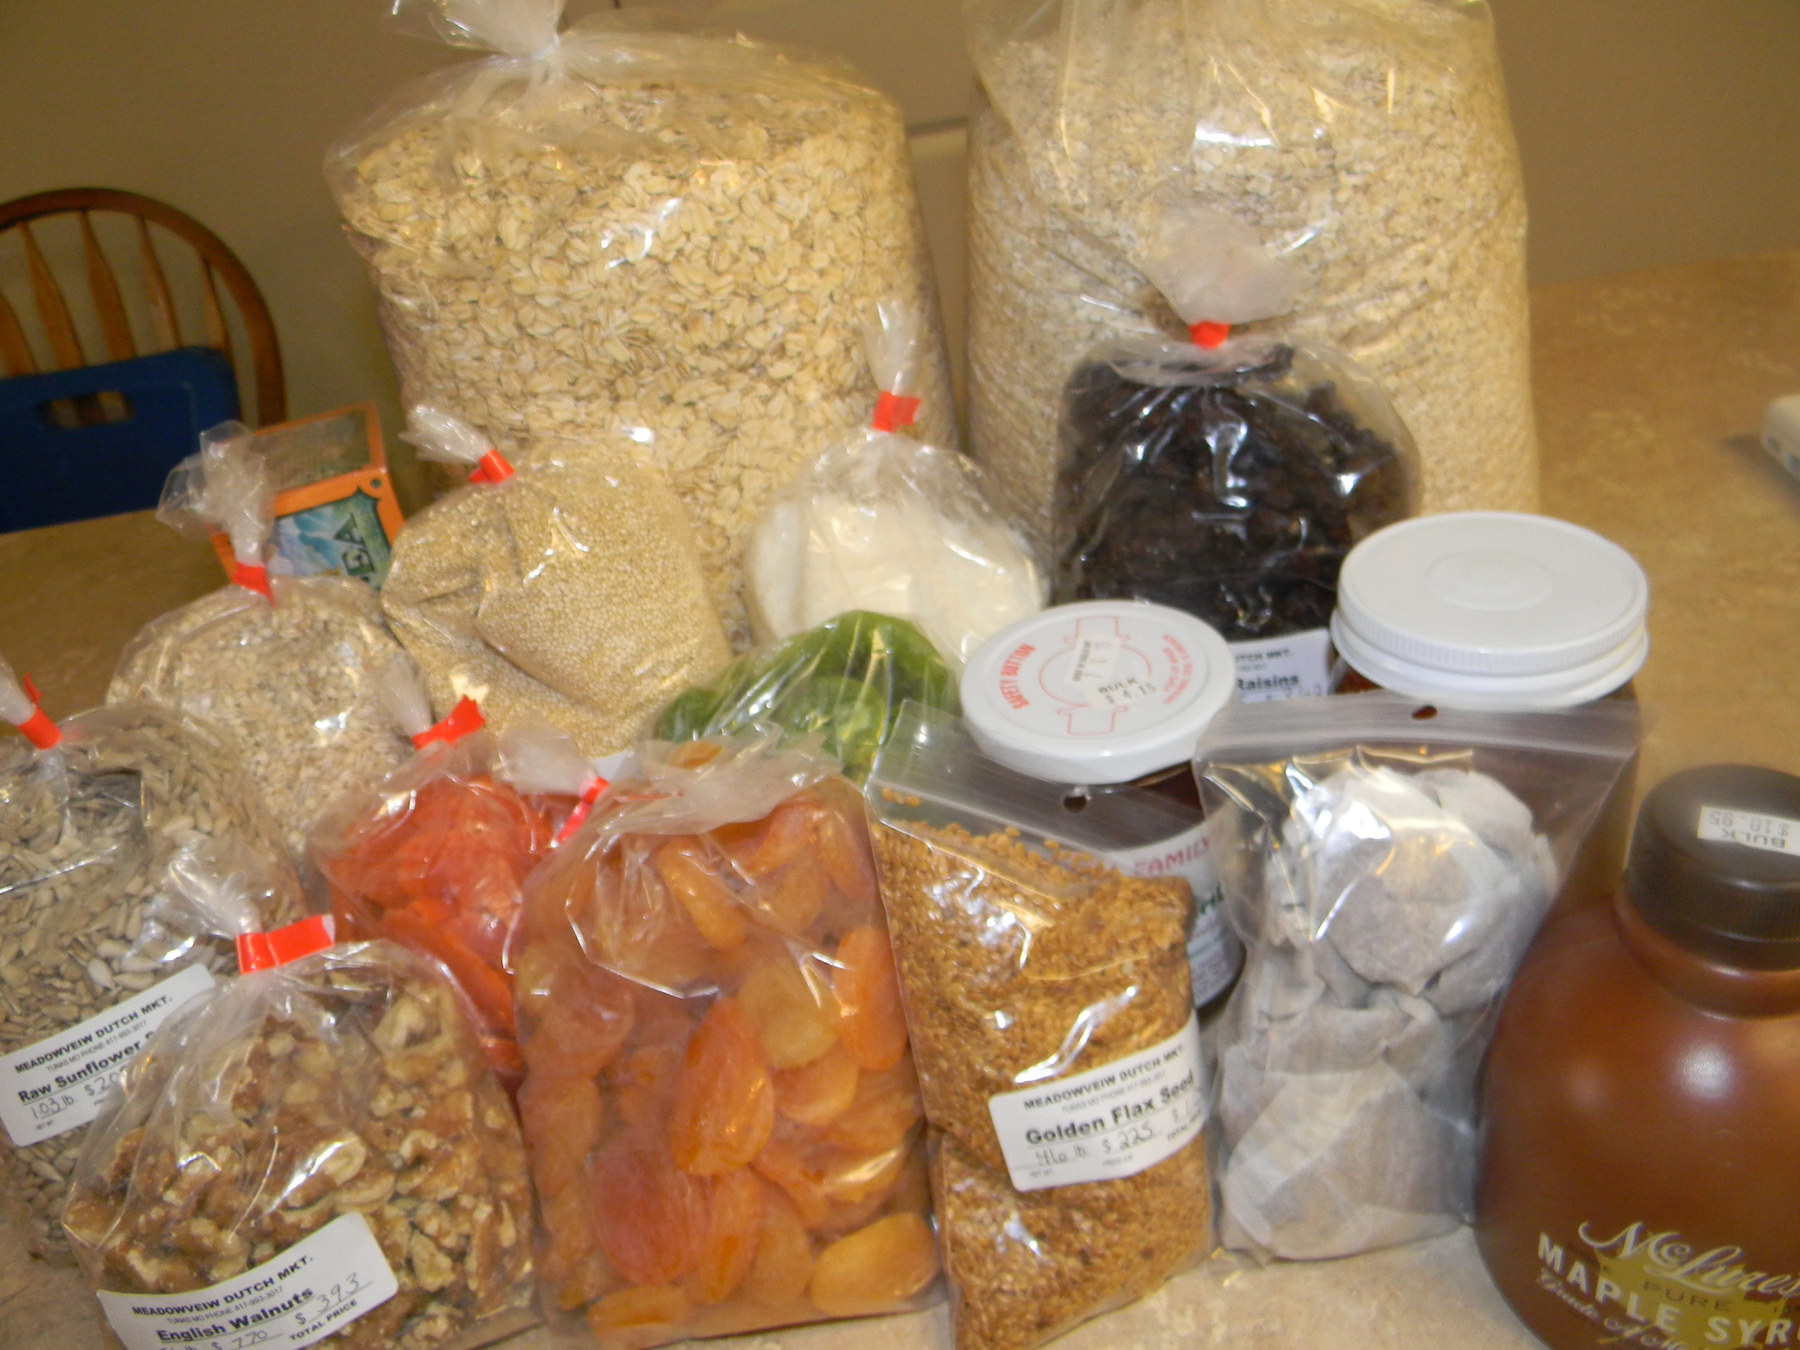 Lots of bulk foods from the Mennonite store in the area